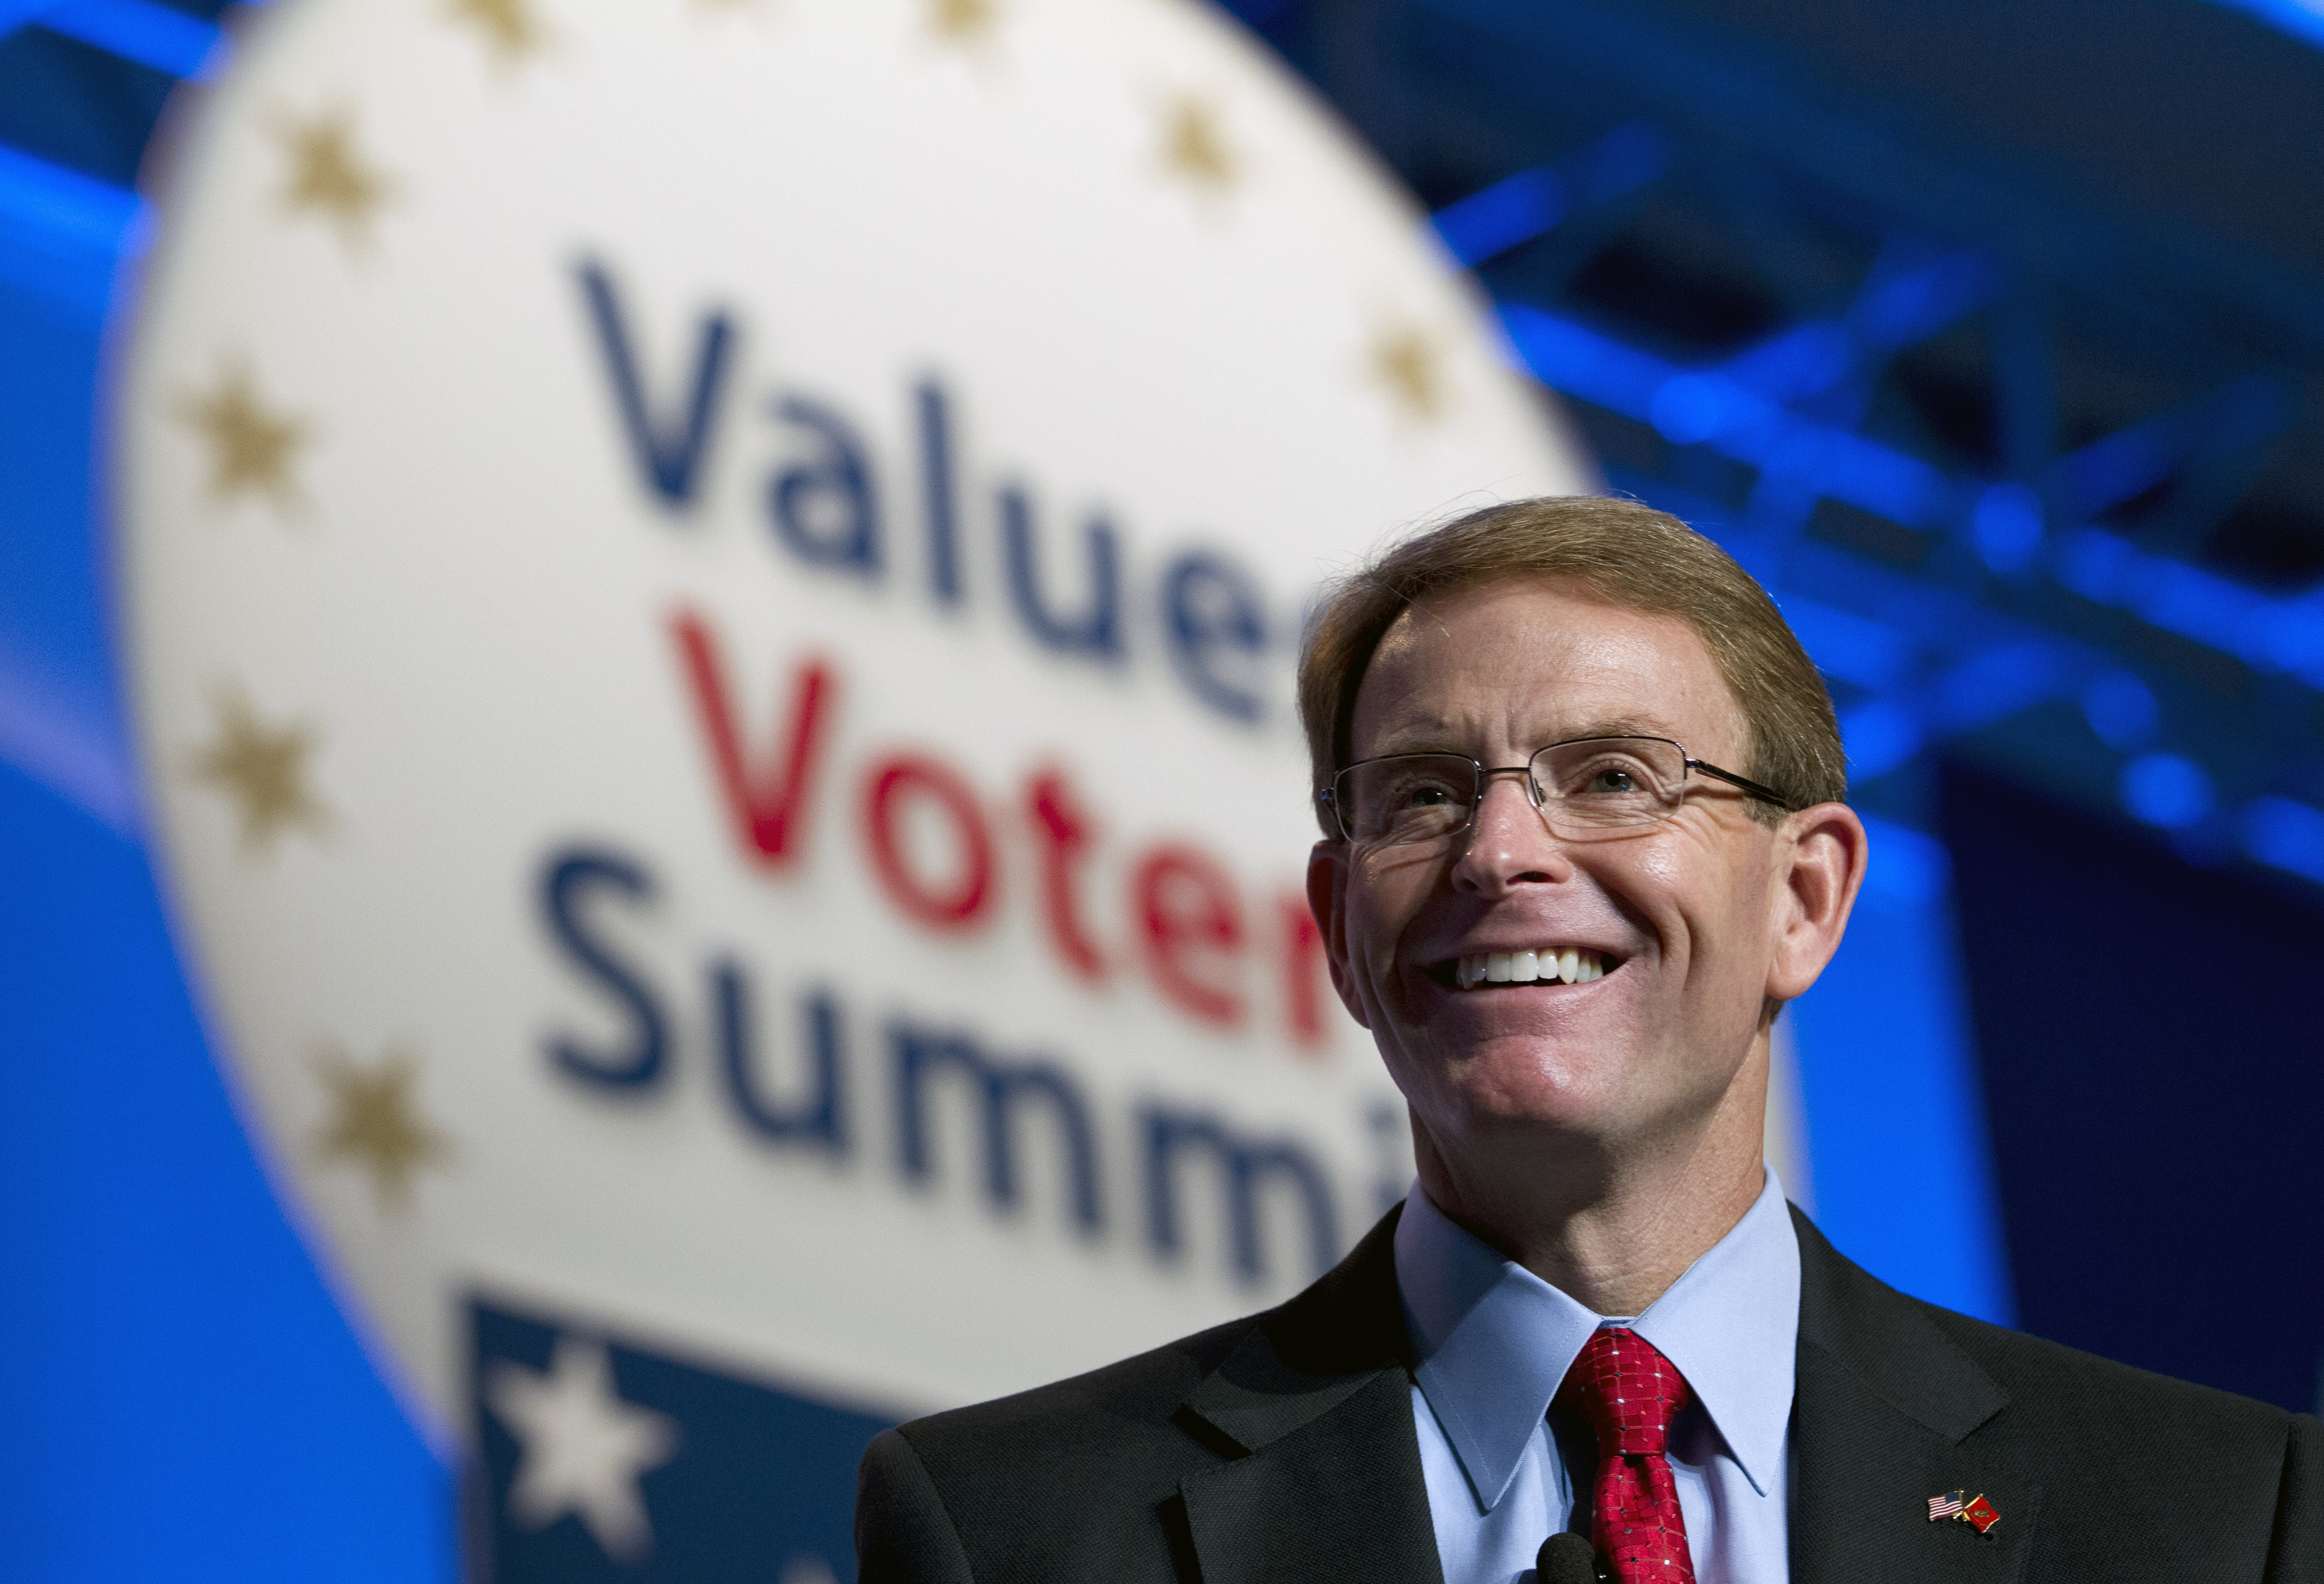 FRCAction and Family Research Council President Tony Perkins, speaks during the Values Voter Summit, held by the Family Research Council Action, on Oct. 11, 2013, in Washington, D.C.